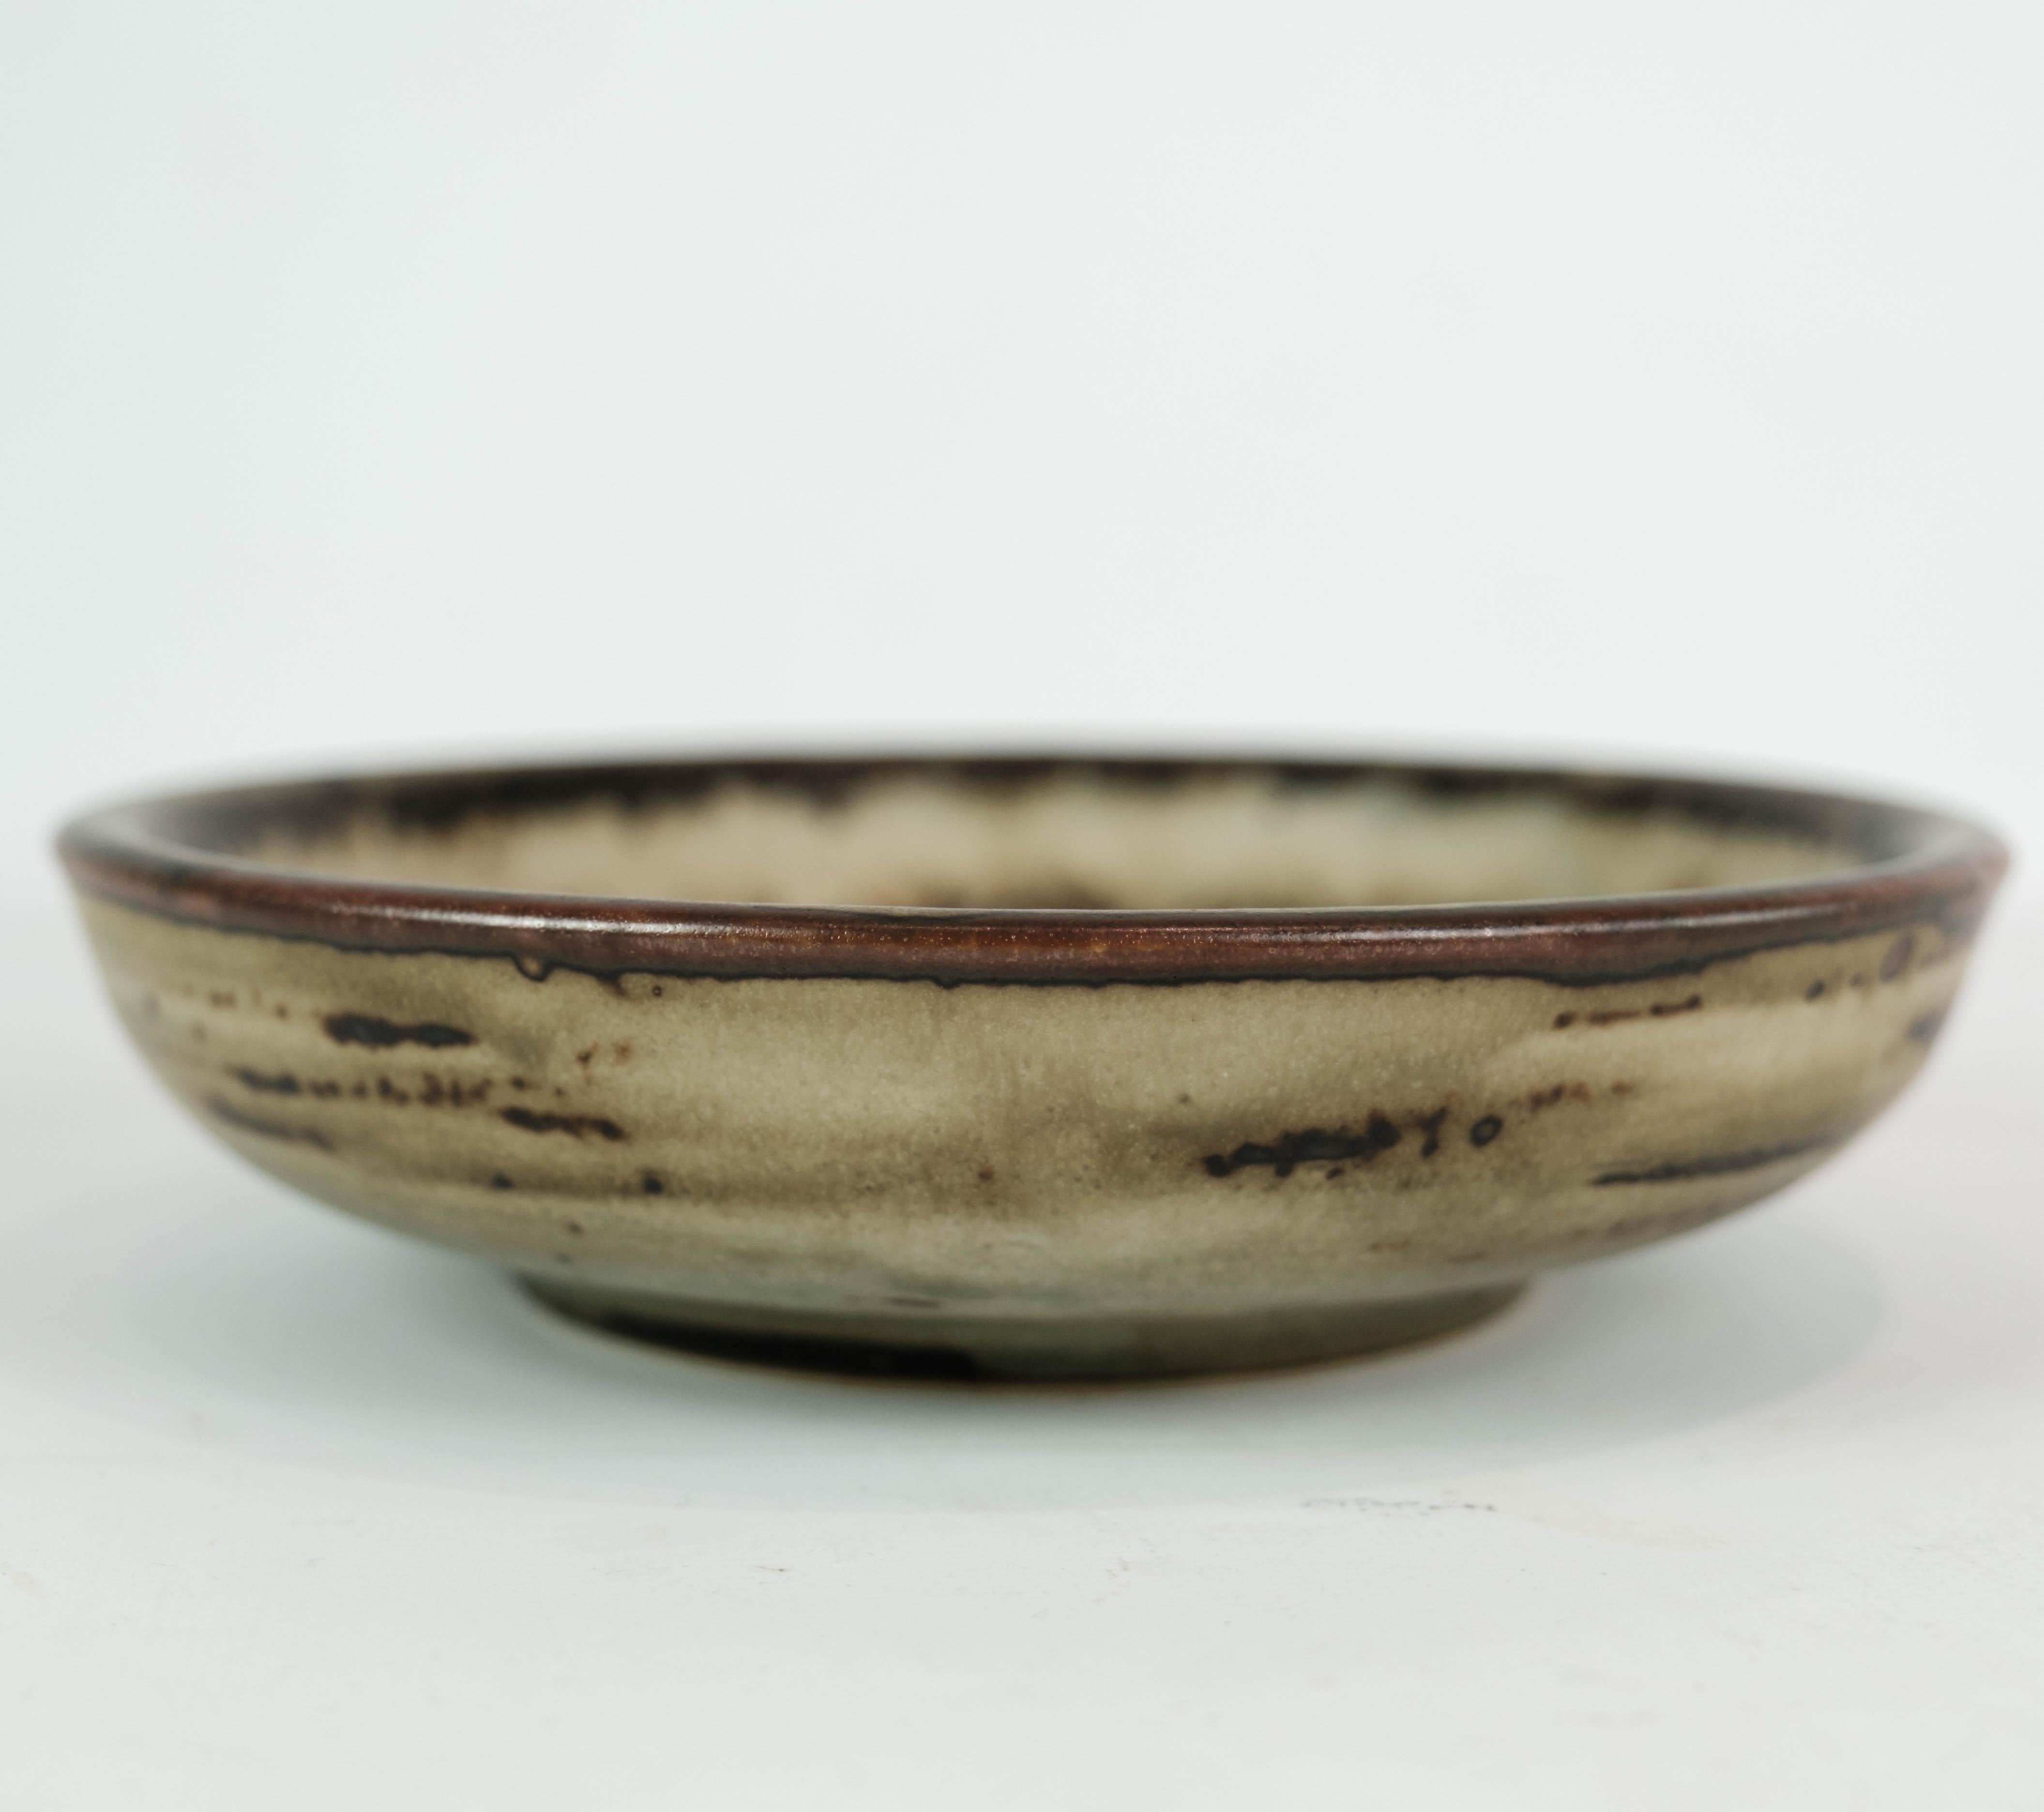 This stoneware bowl, numbered 21567, is a stunning creation by the acclaimed Danish ceramic artist Gerd Bøgelund. Crafted with precision and finesse, it embodies the artistic excellence for which Bøgelund is renowned.

With its rich brown hues and